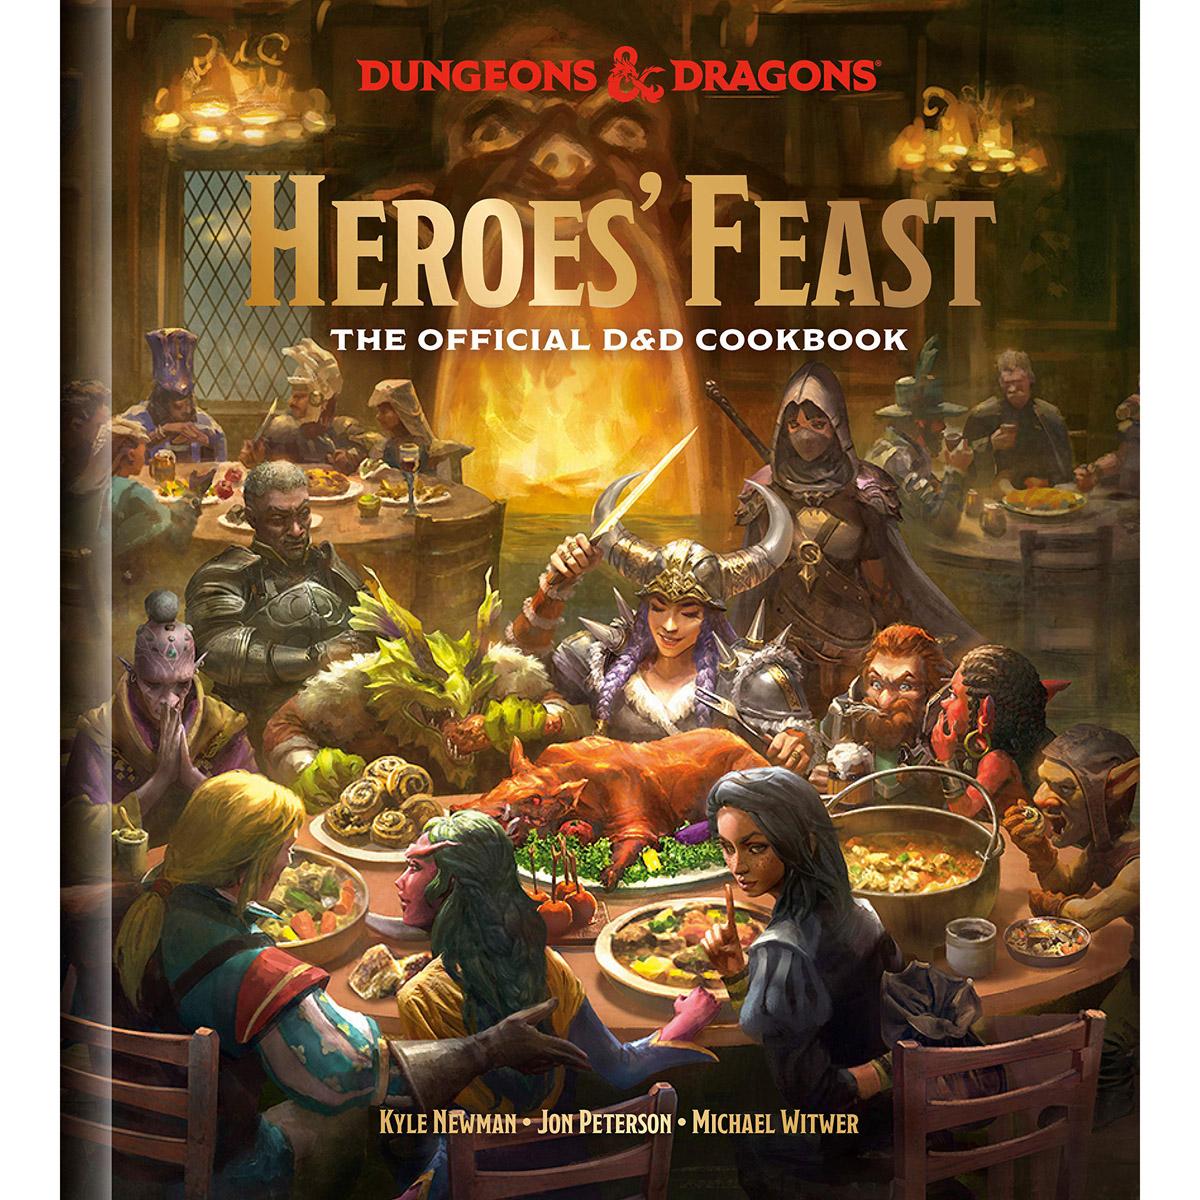 Dungeons and Dragons Heroes Feast The Official D&D Cookbook for $2.99